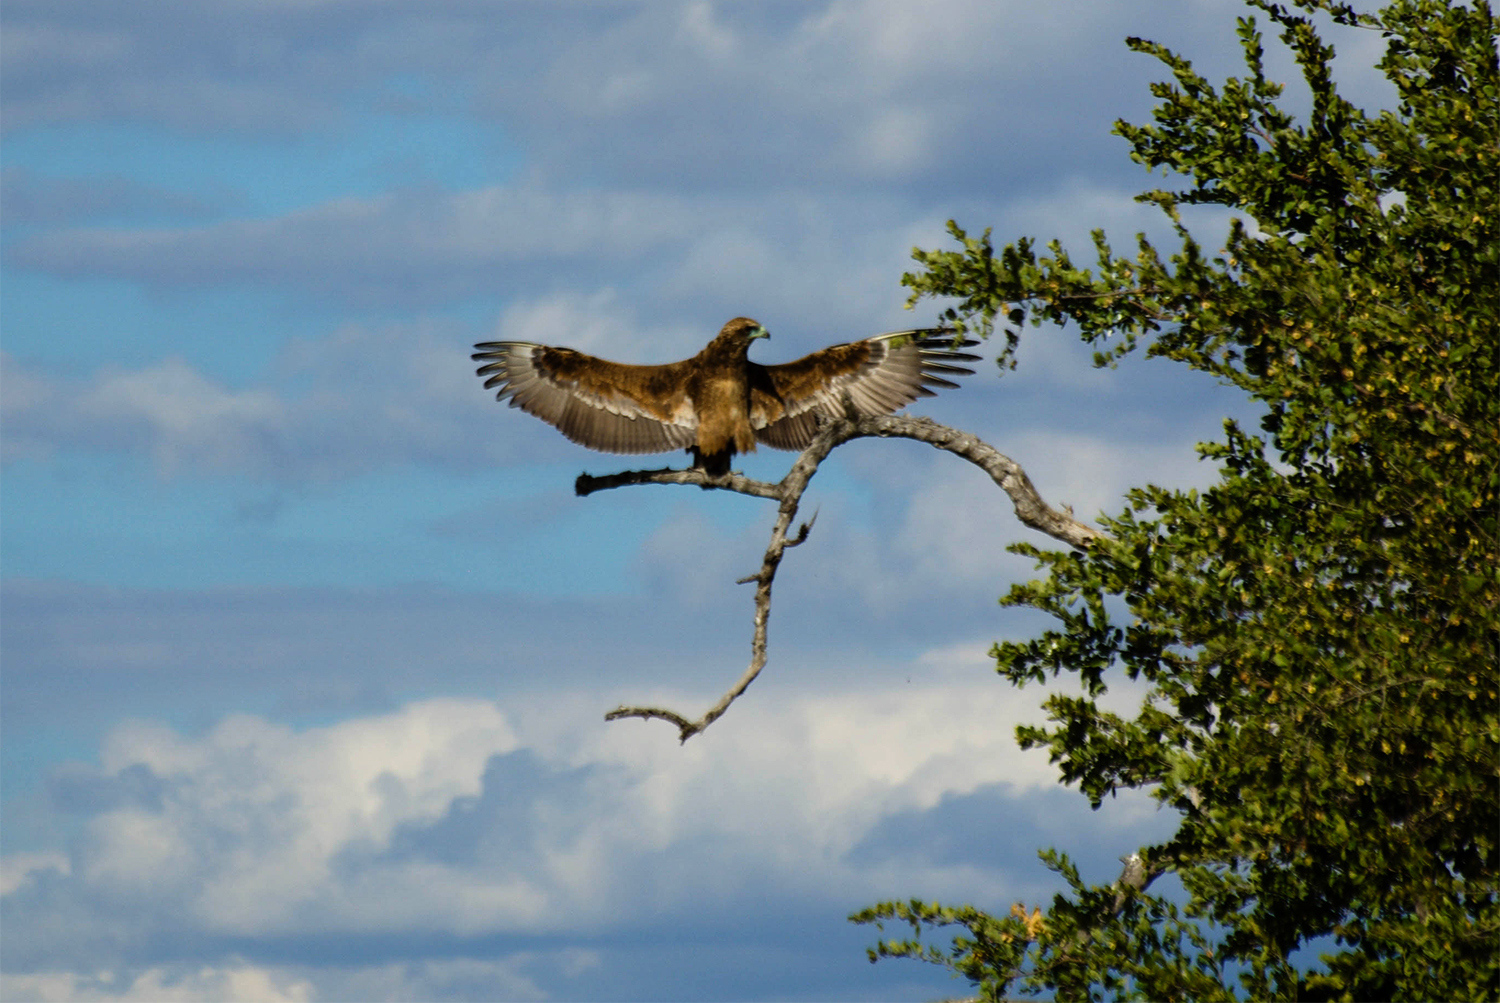 <p>An eagle (a Wahlberg's eagle, I think) spreads its wings while resting on a tree branch.</p>